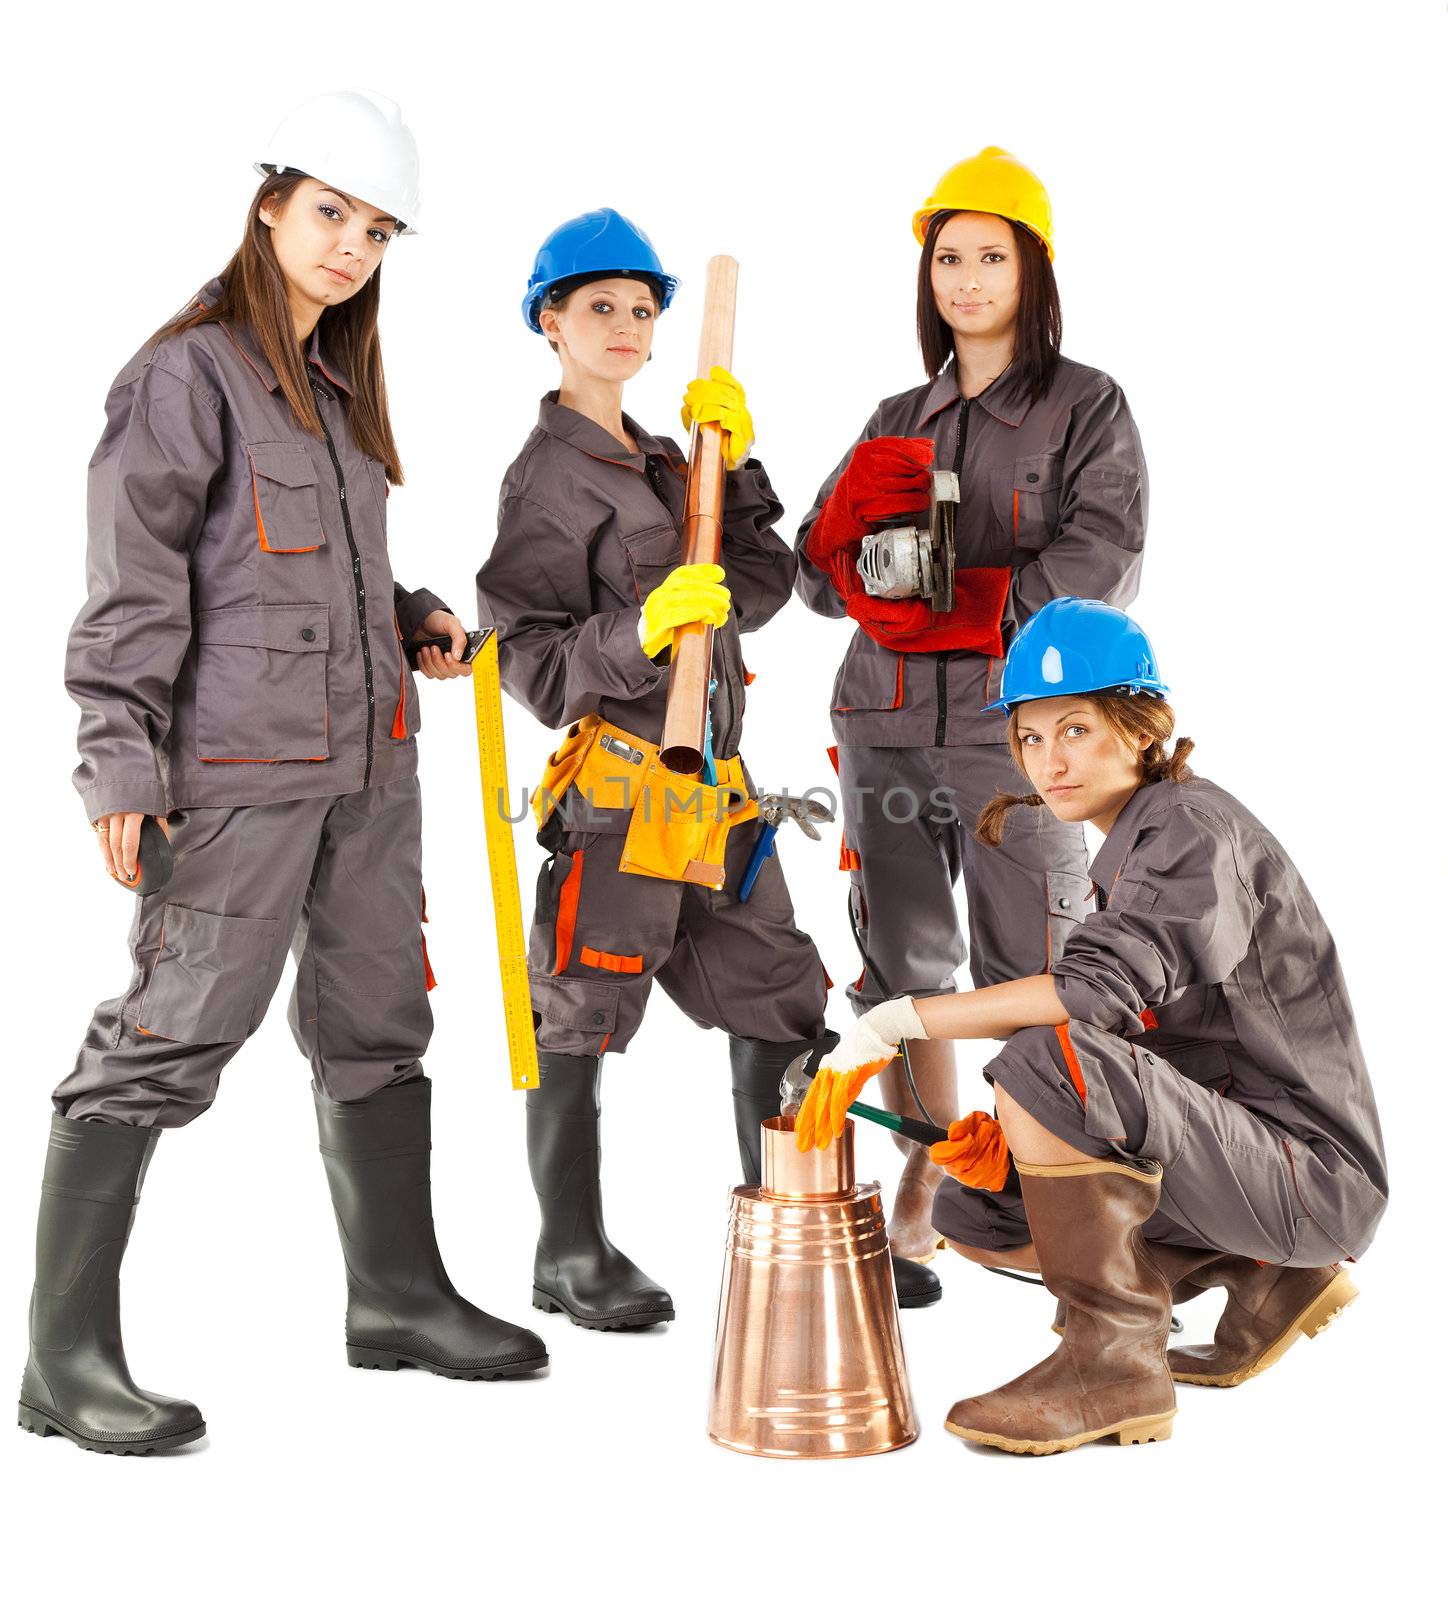 Four female construction workers posing with instruments, isolated